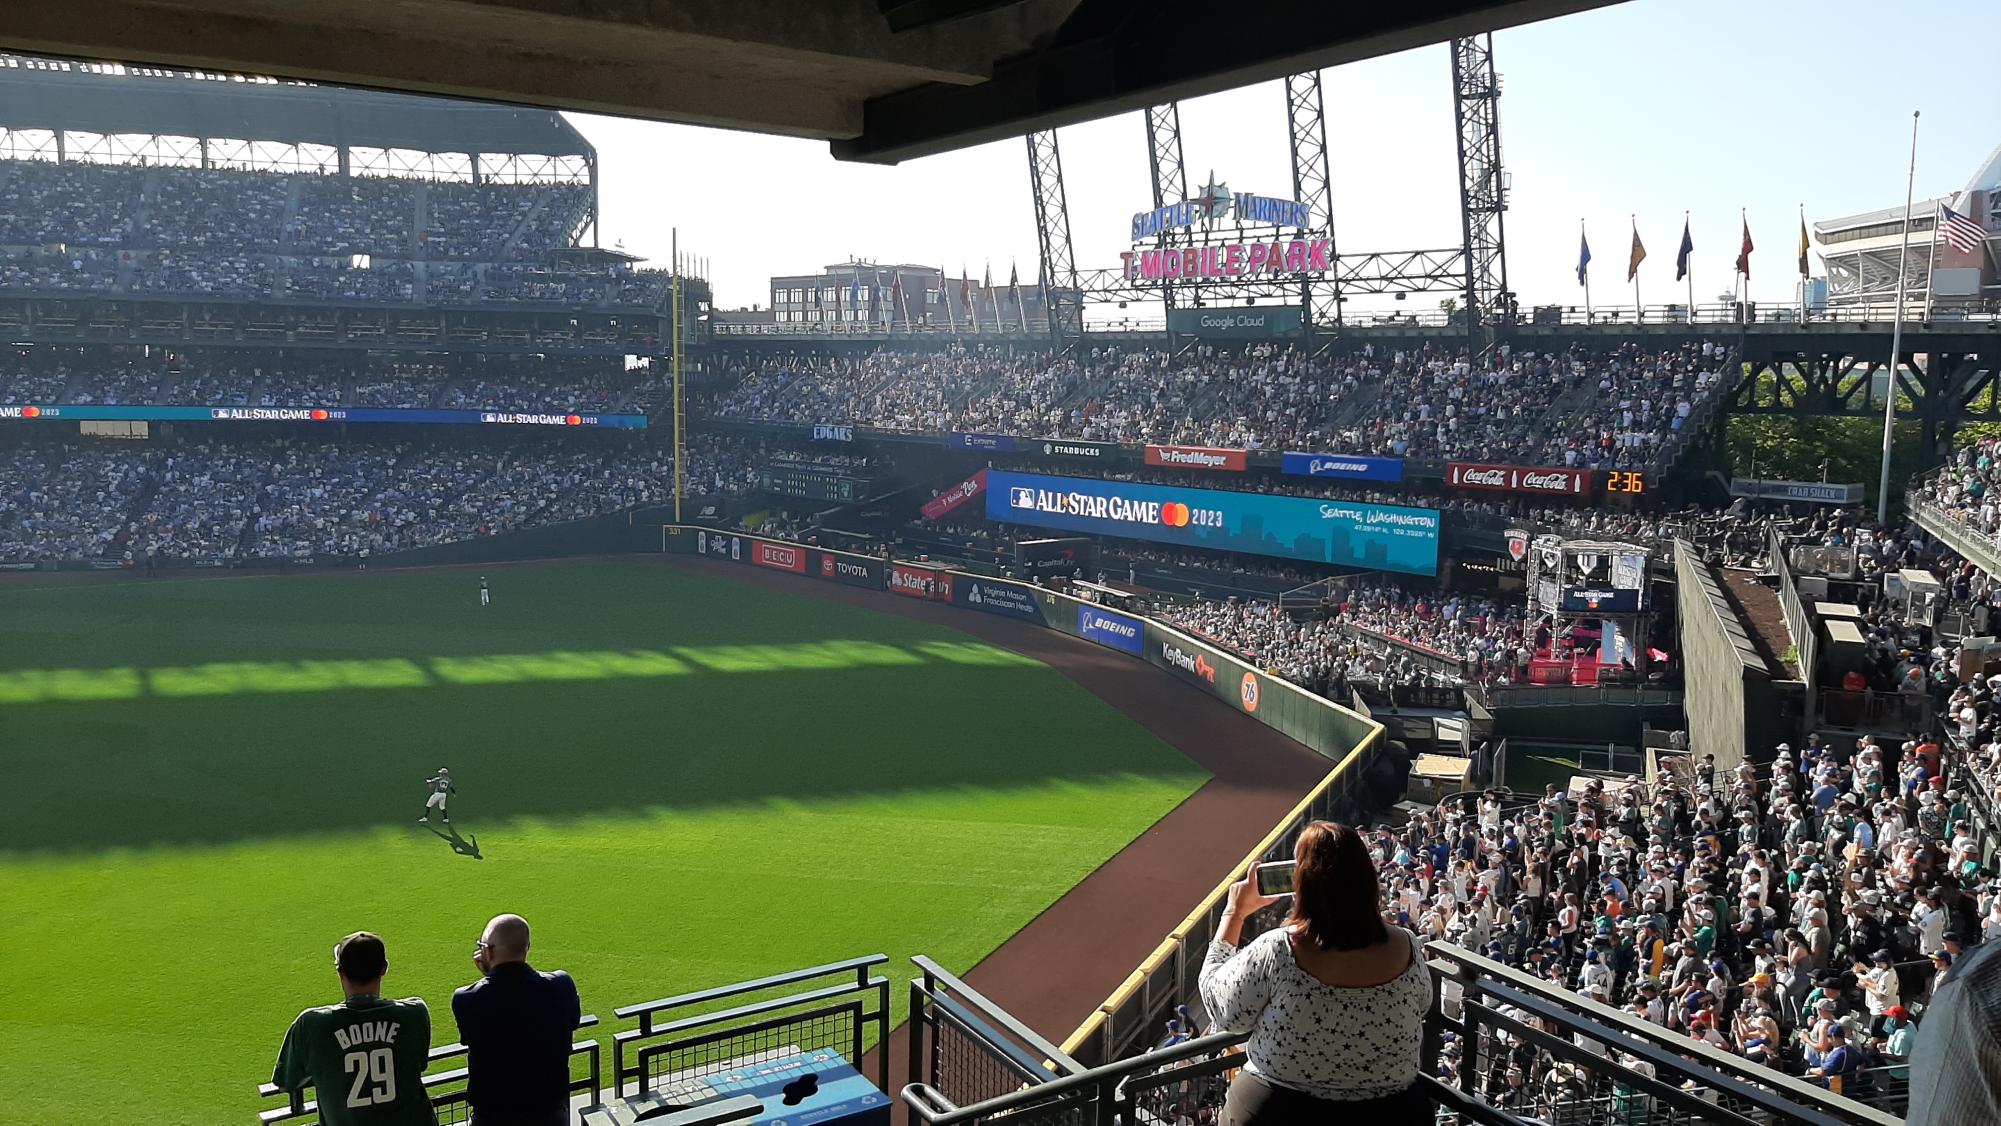 Coors Field: A Love Letter 